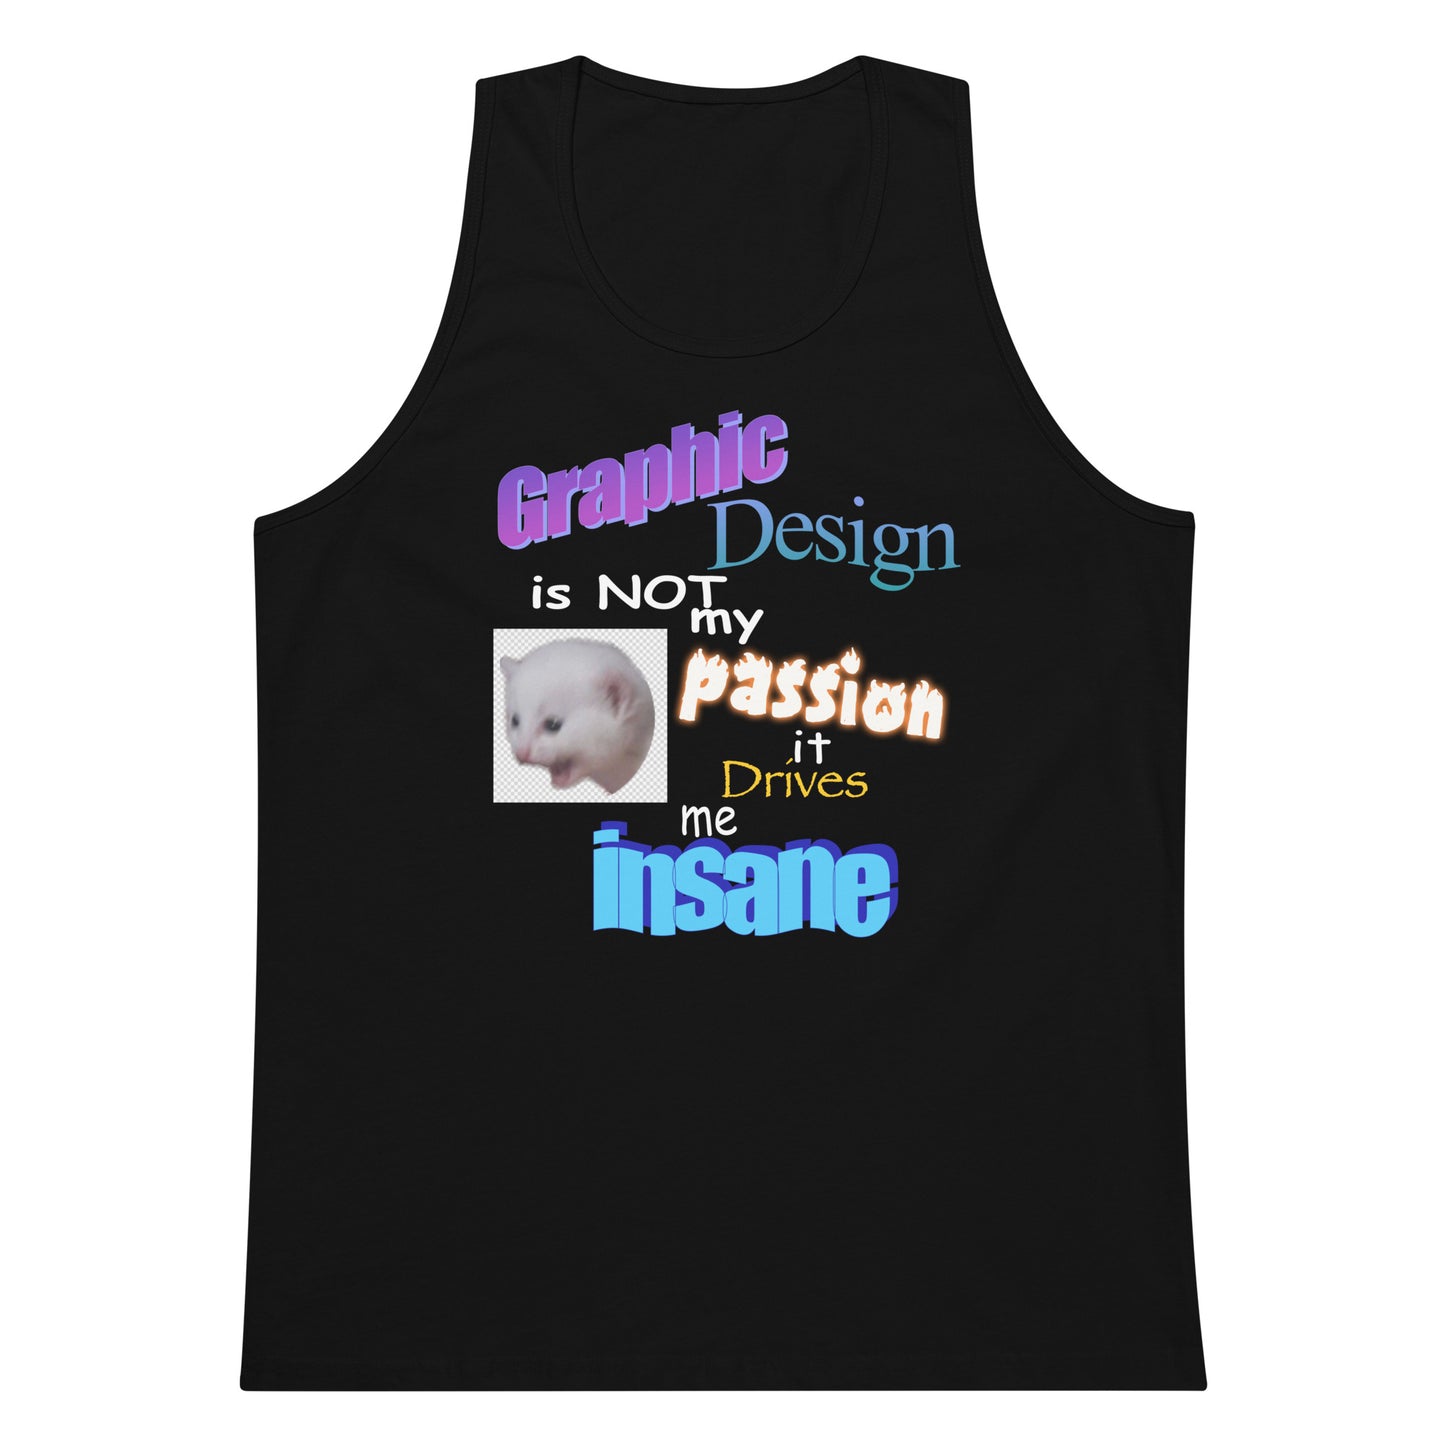 Graphic Design is NOT My Passion tank top